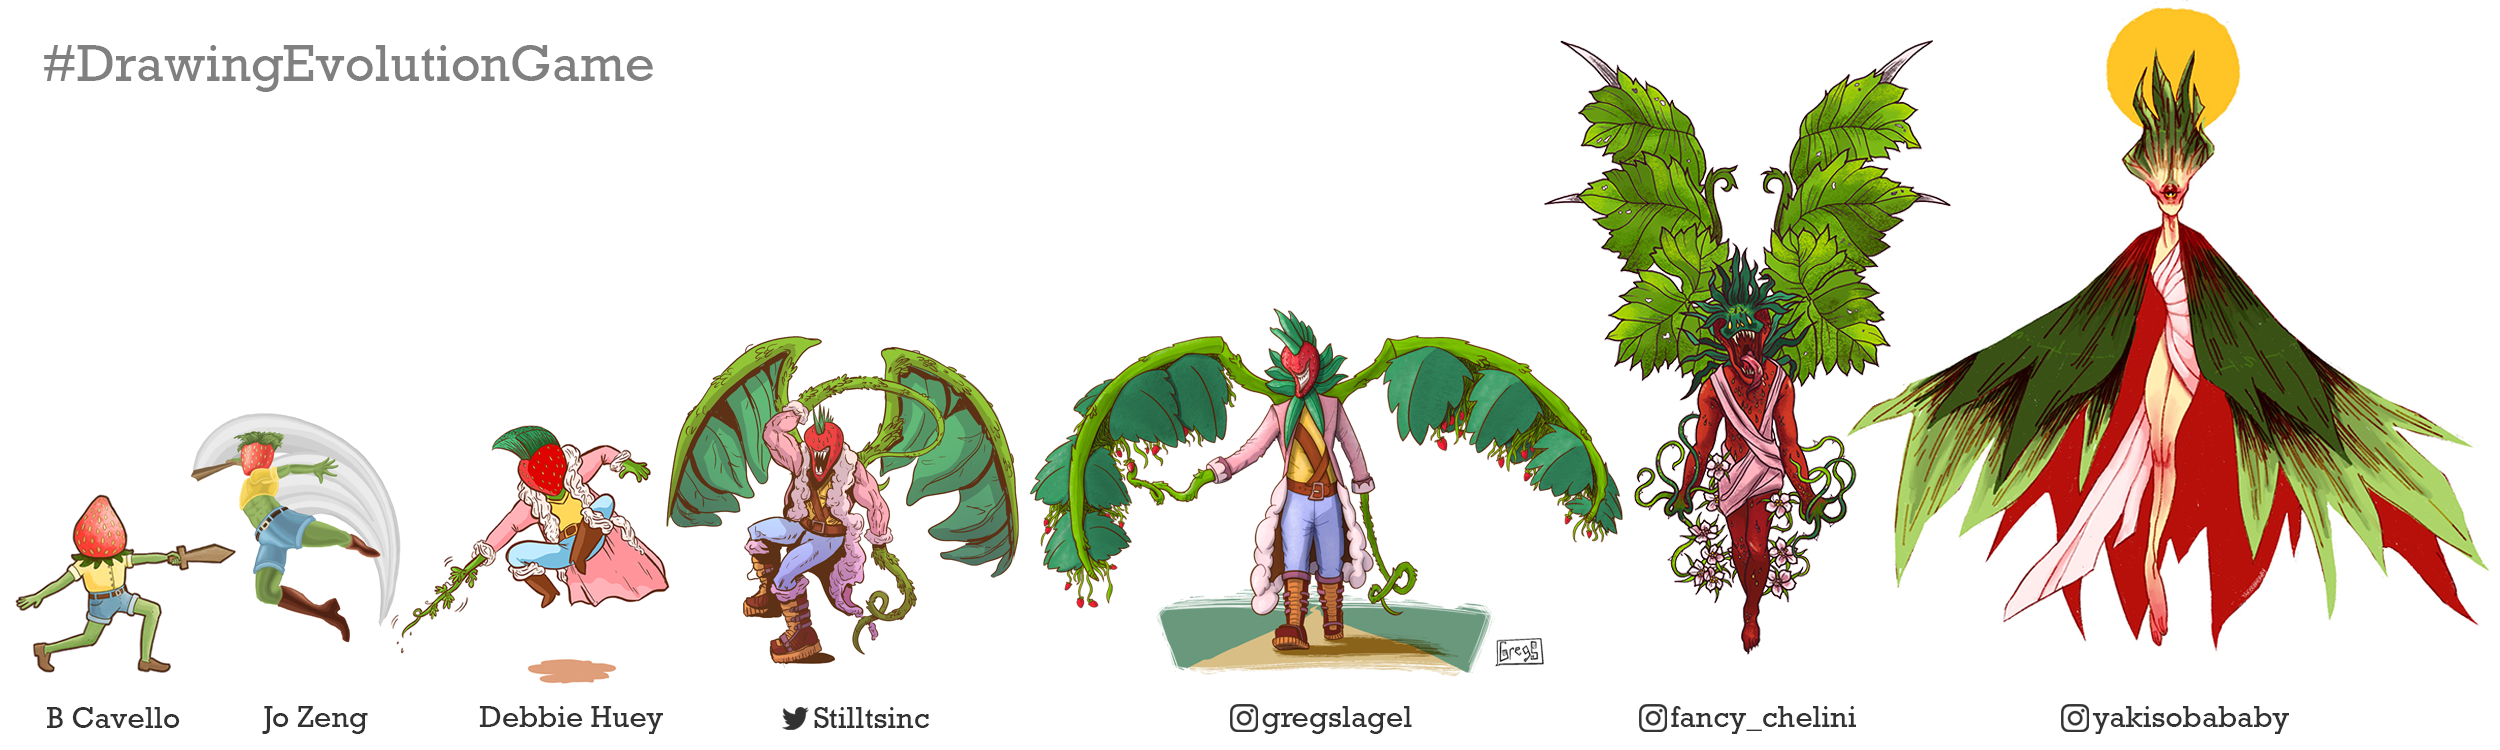 In this branch, the strawberry seed character evolves into a vast and awesome angel with big leafy wings